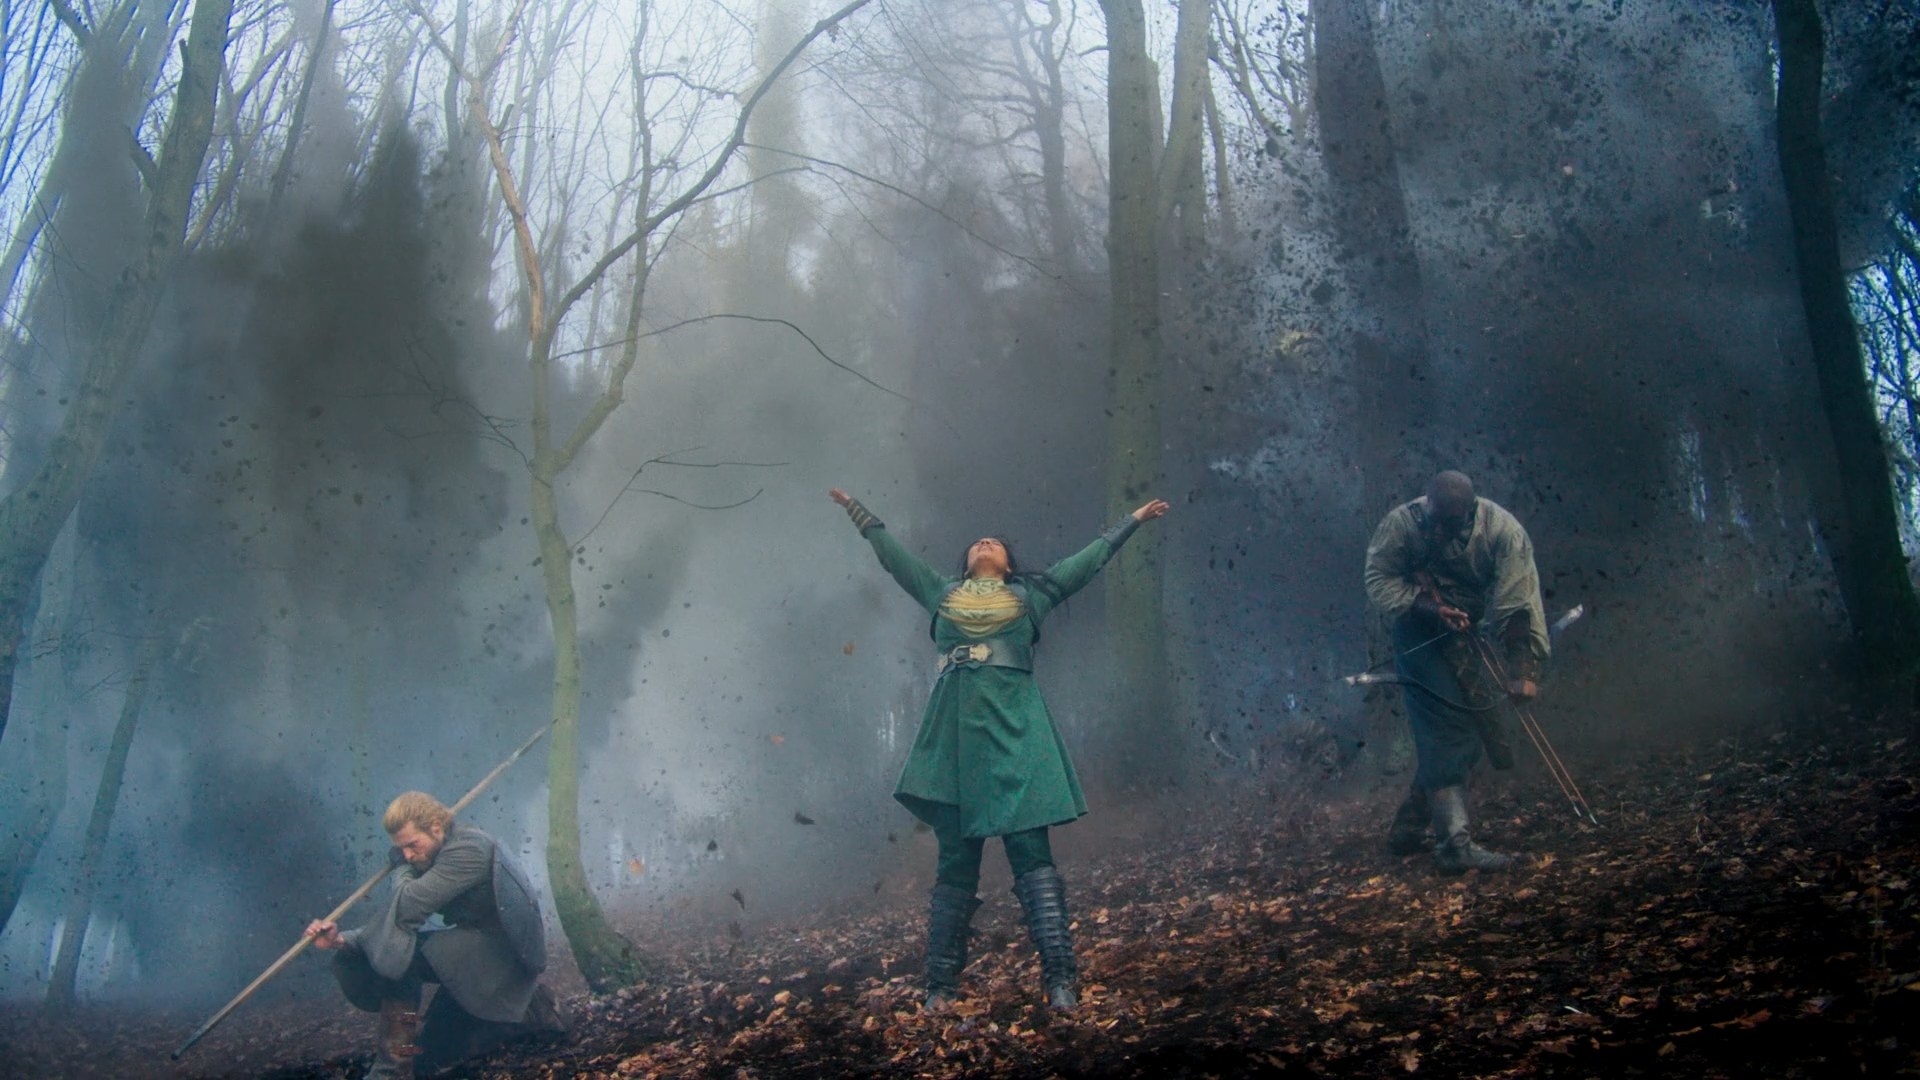 Alanna (Priyanka Bose) has her arms flung wide and her head pulled back in a shout as she uses the One Power to create massive explosions in the woods around her. She is flanked by her warders, Maksim and Ihvon, who are bracing themselves